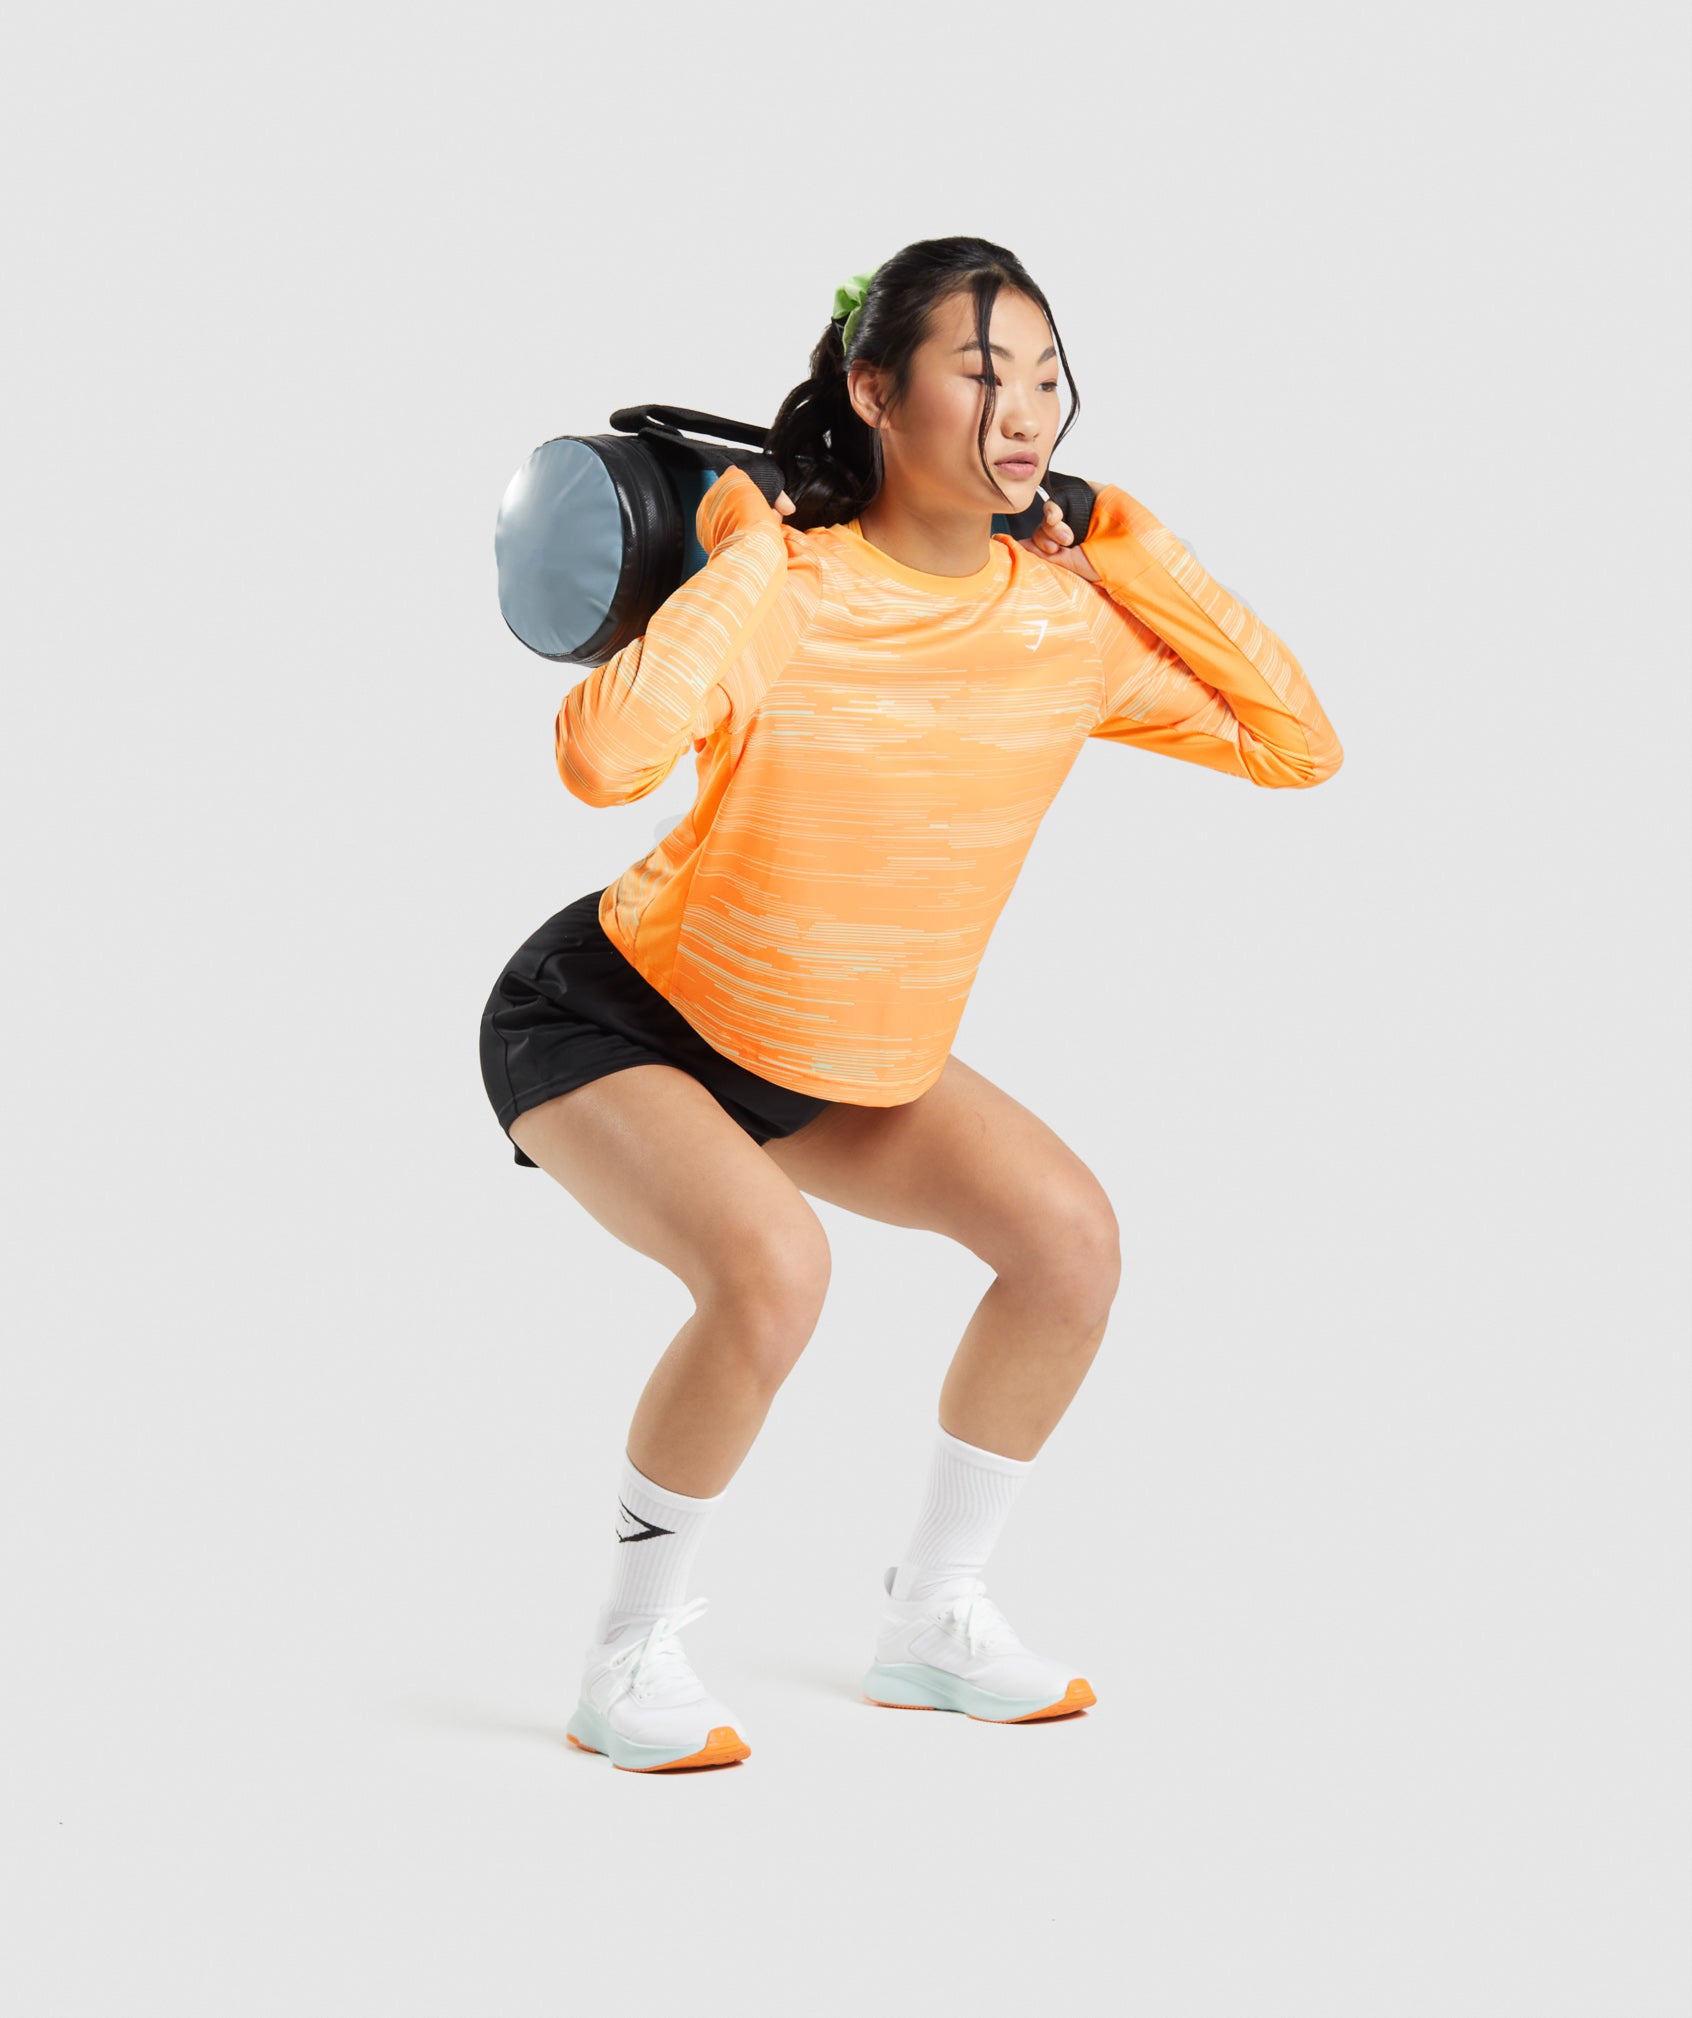 Active Caucasian Female in Red Long Sleeve Jersey and Jogging Outfit  Jumping with Barbells on White Stock Image - Image of inside, portrait:  227595027